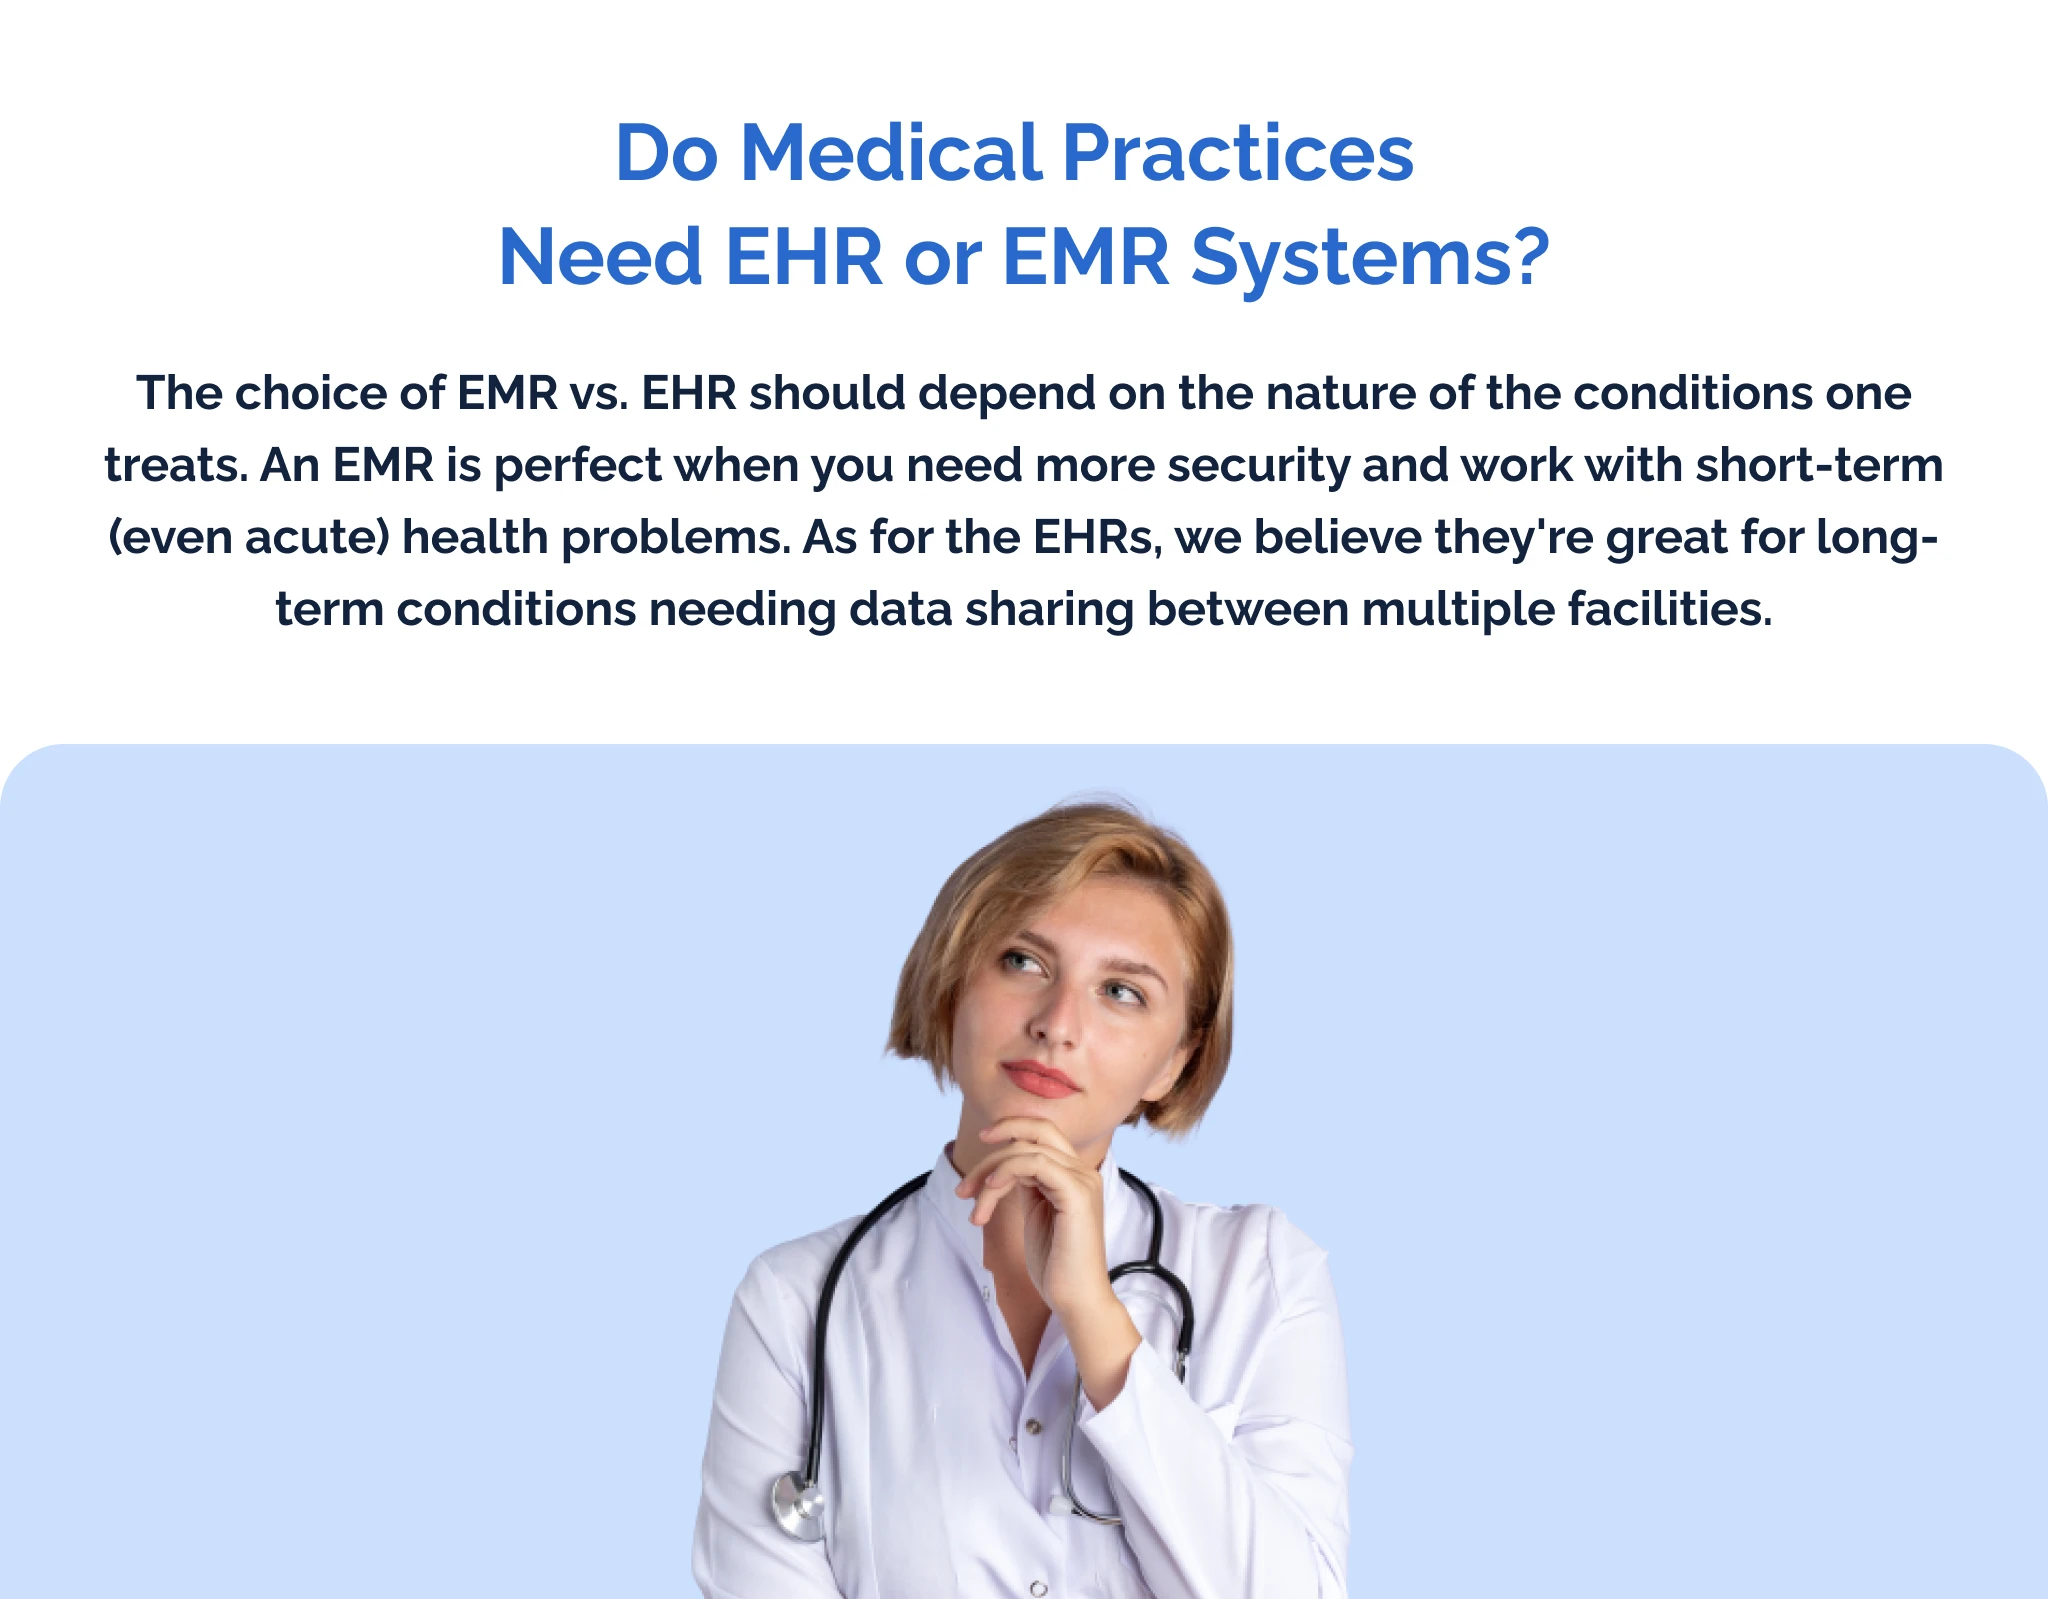 Do medical practices need EHR or EMR systems